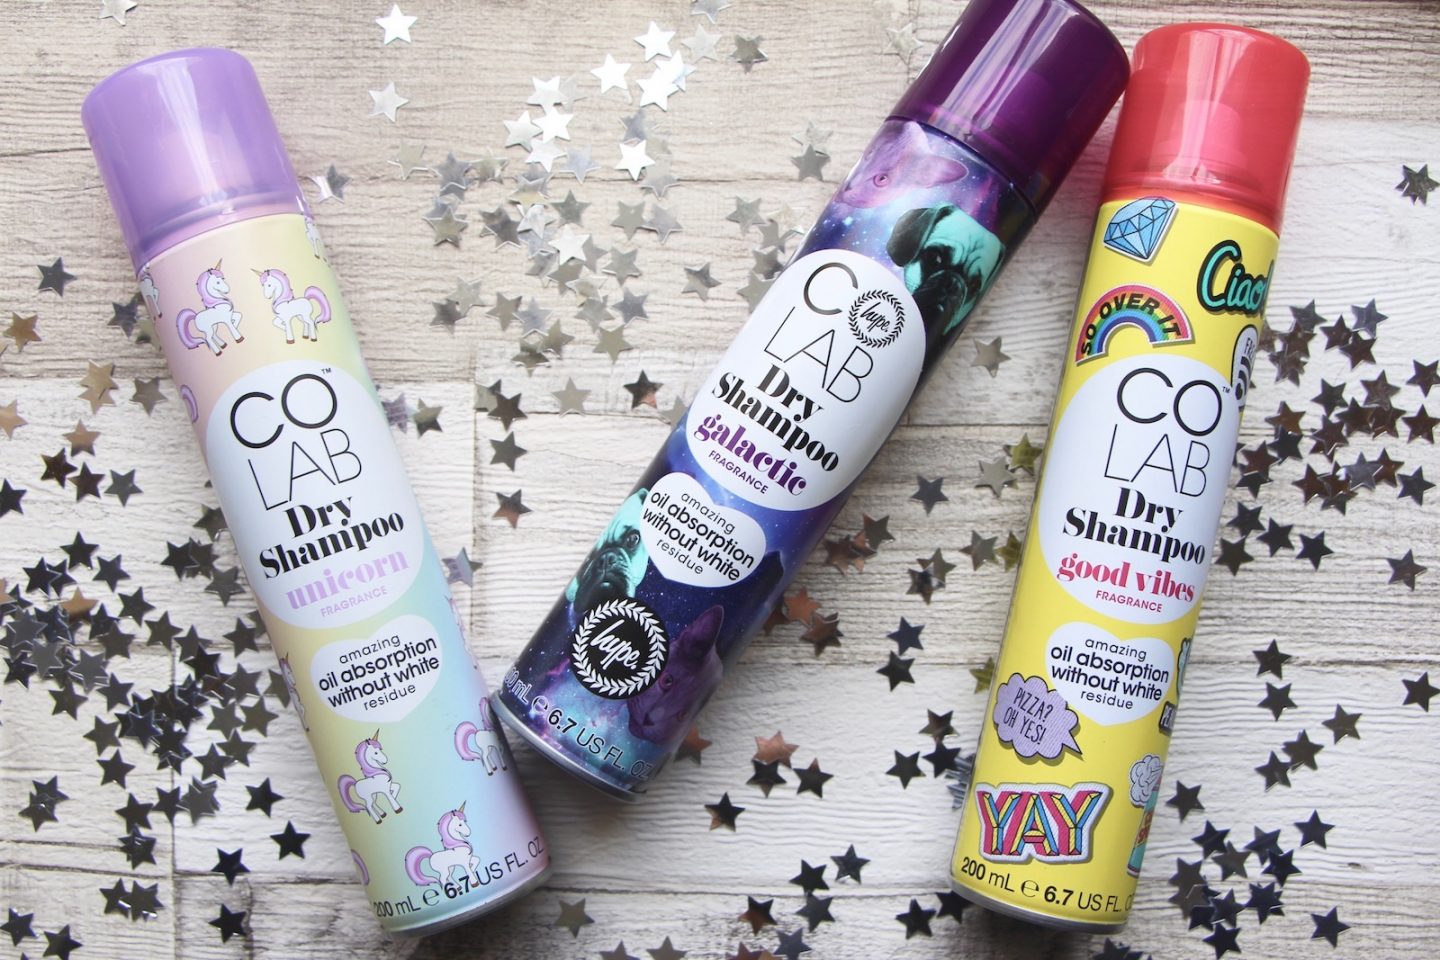 colab dry shampoo at boots